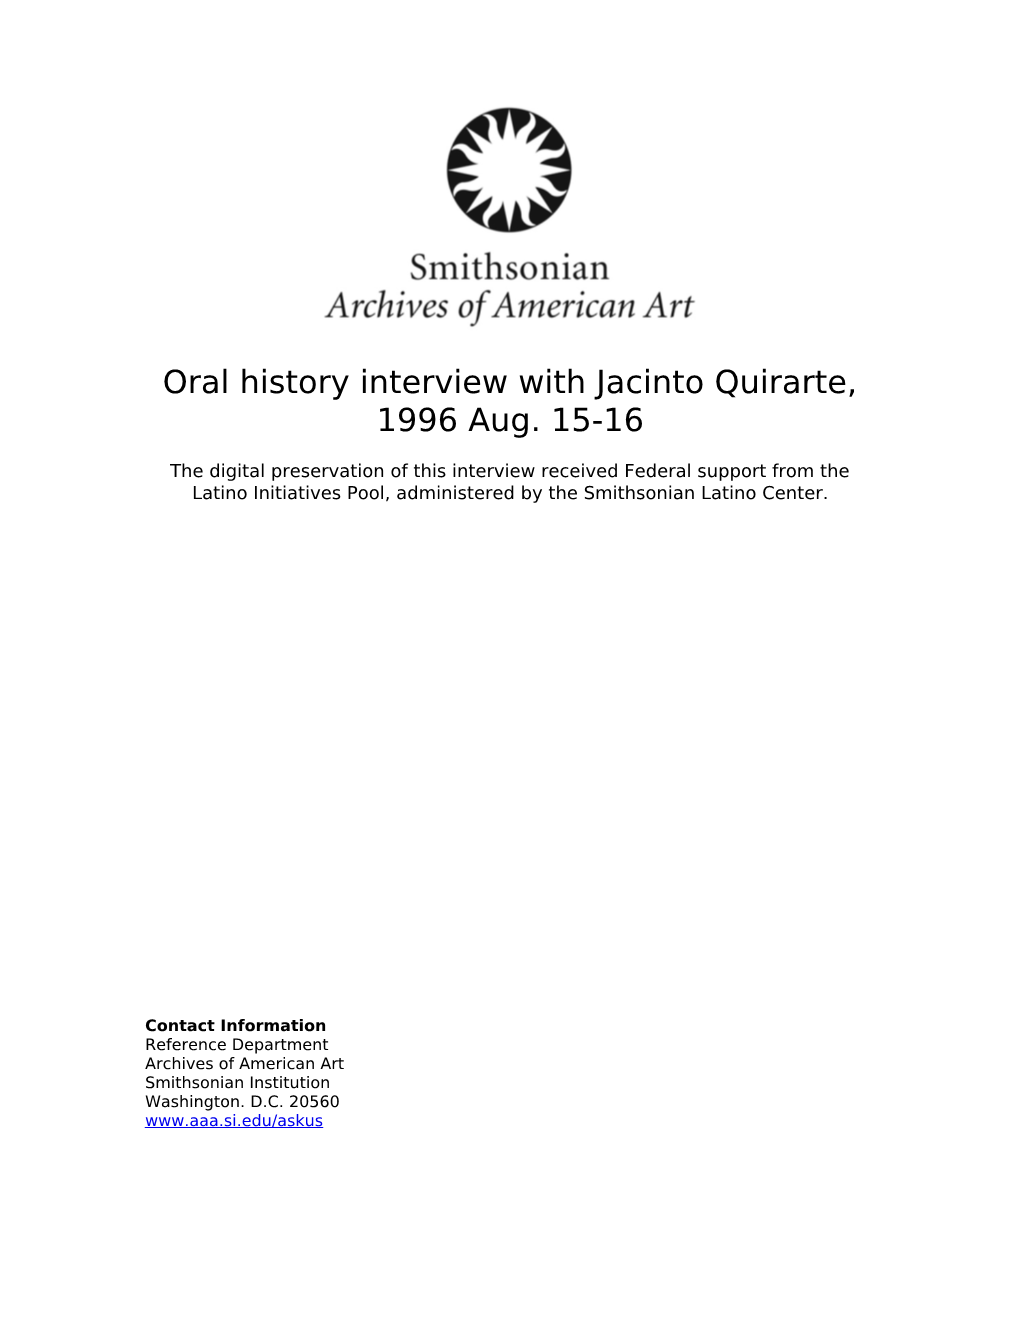 Oral History Interview with Jacinto Quirarte, 1996 Aug. 15-16